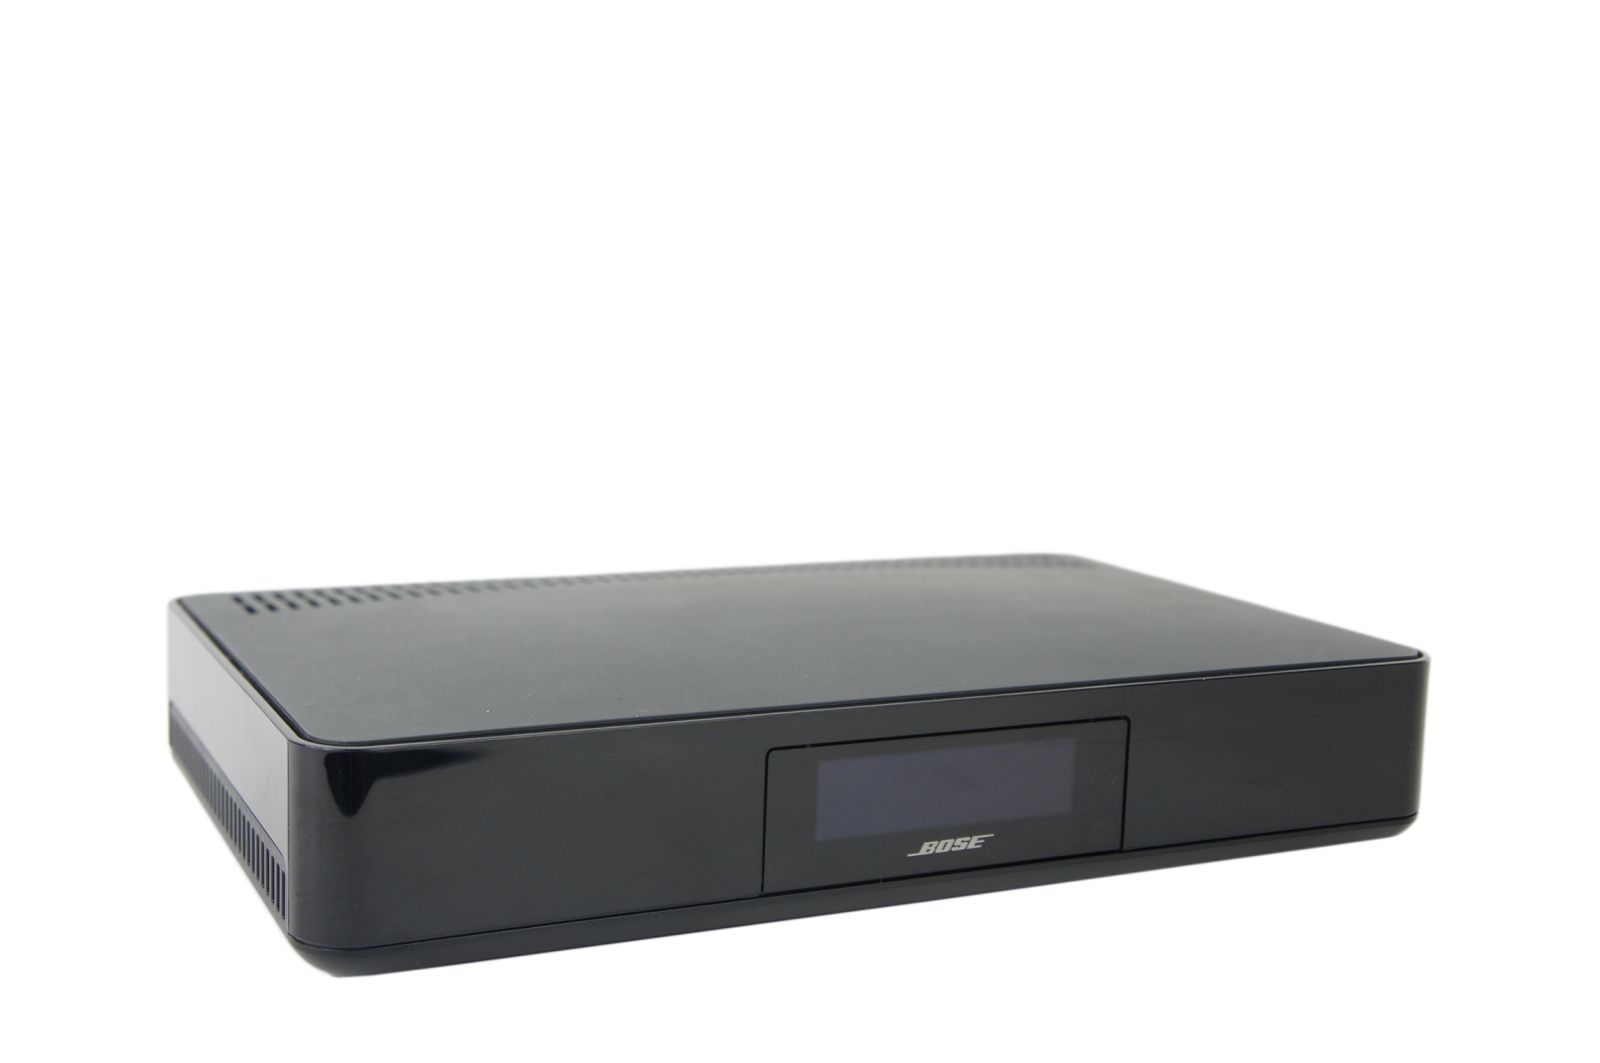 BOSE_SoundTouch_220_2.1_Heimkino-System_11